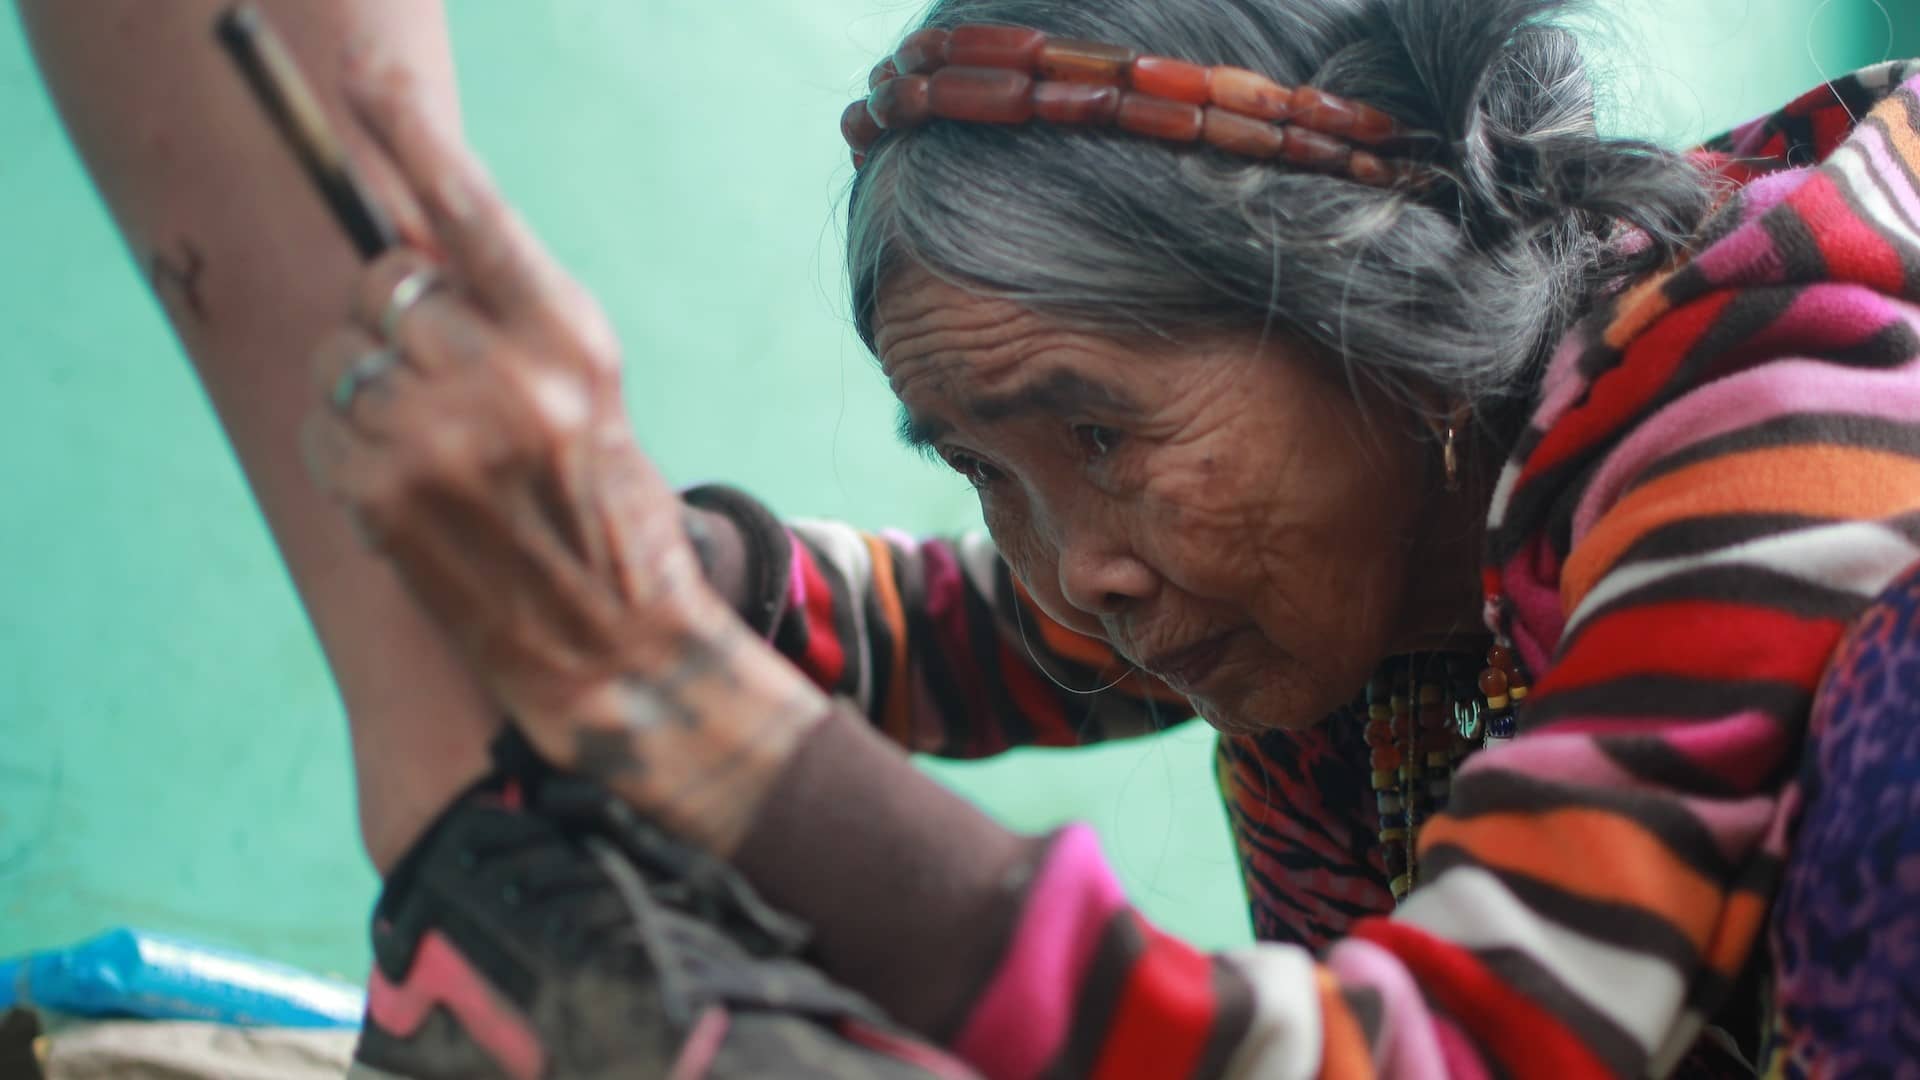 Image: Filipino tattoo artist,106-year-old Apo Whang-Od, tattooing a customer's ankle